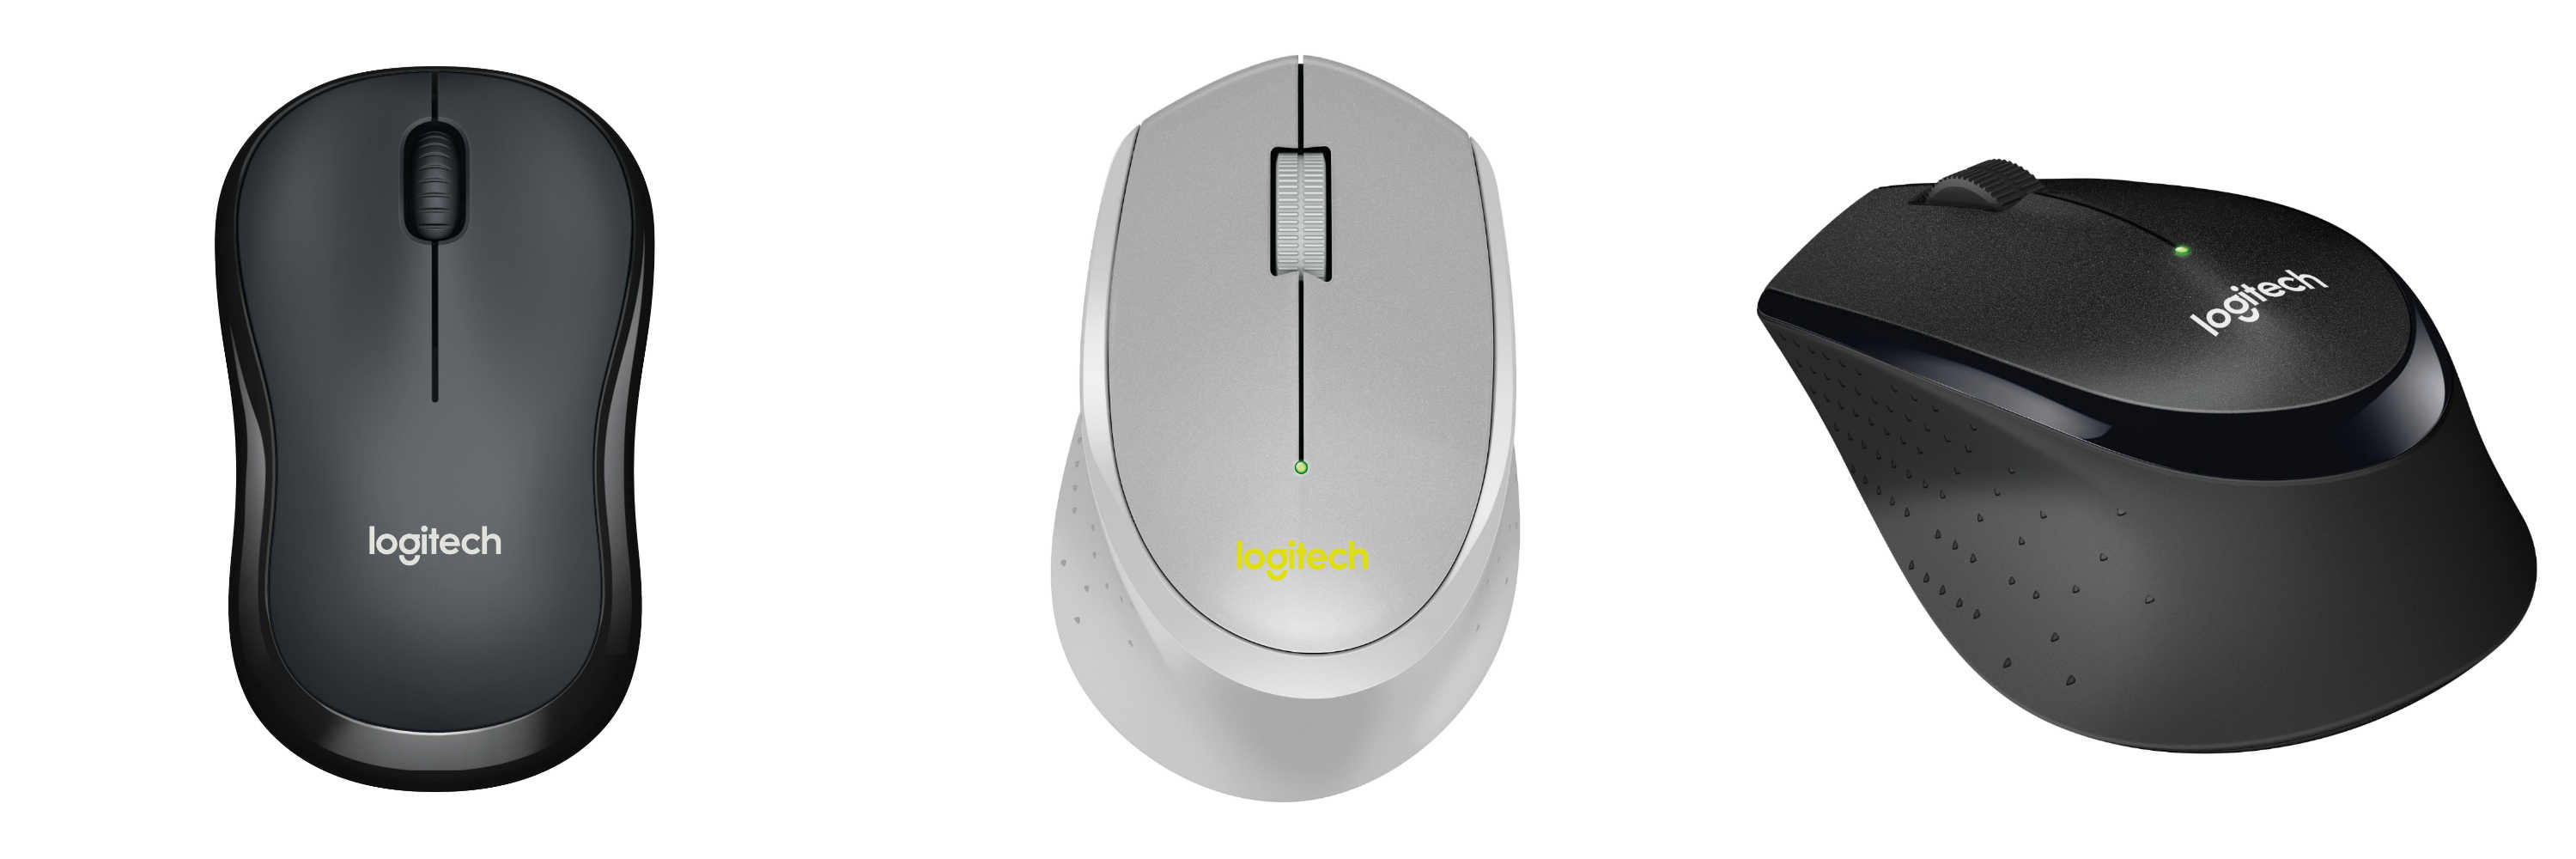 These new Silent Mice from Logitech take the fight to mouse-induced misophonia.